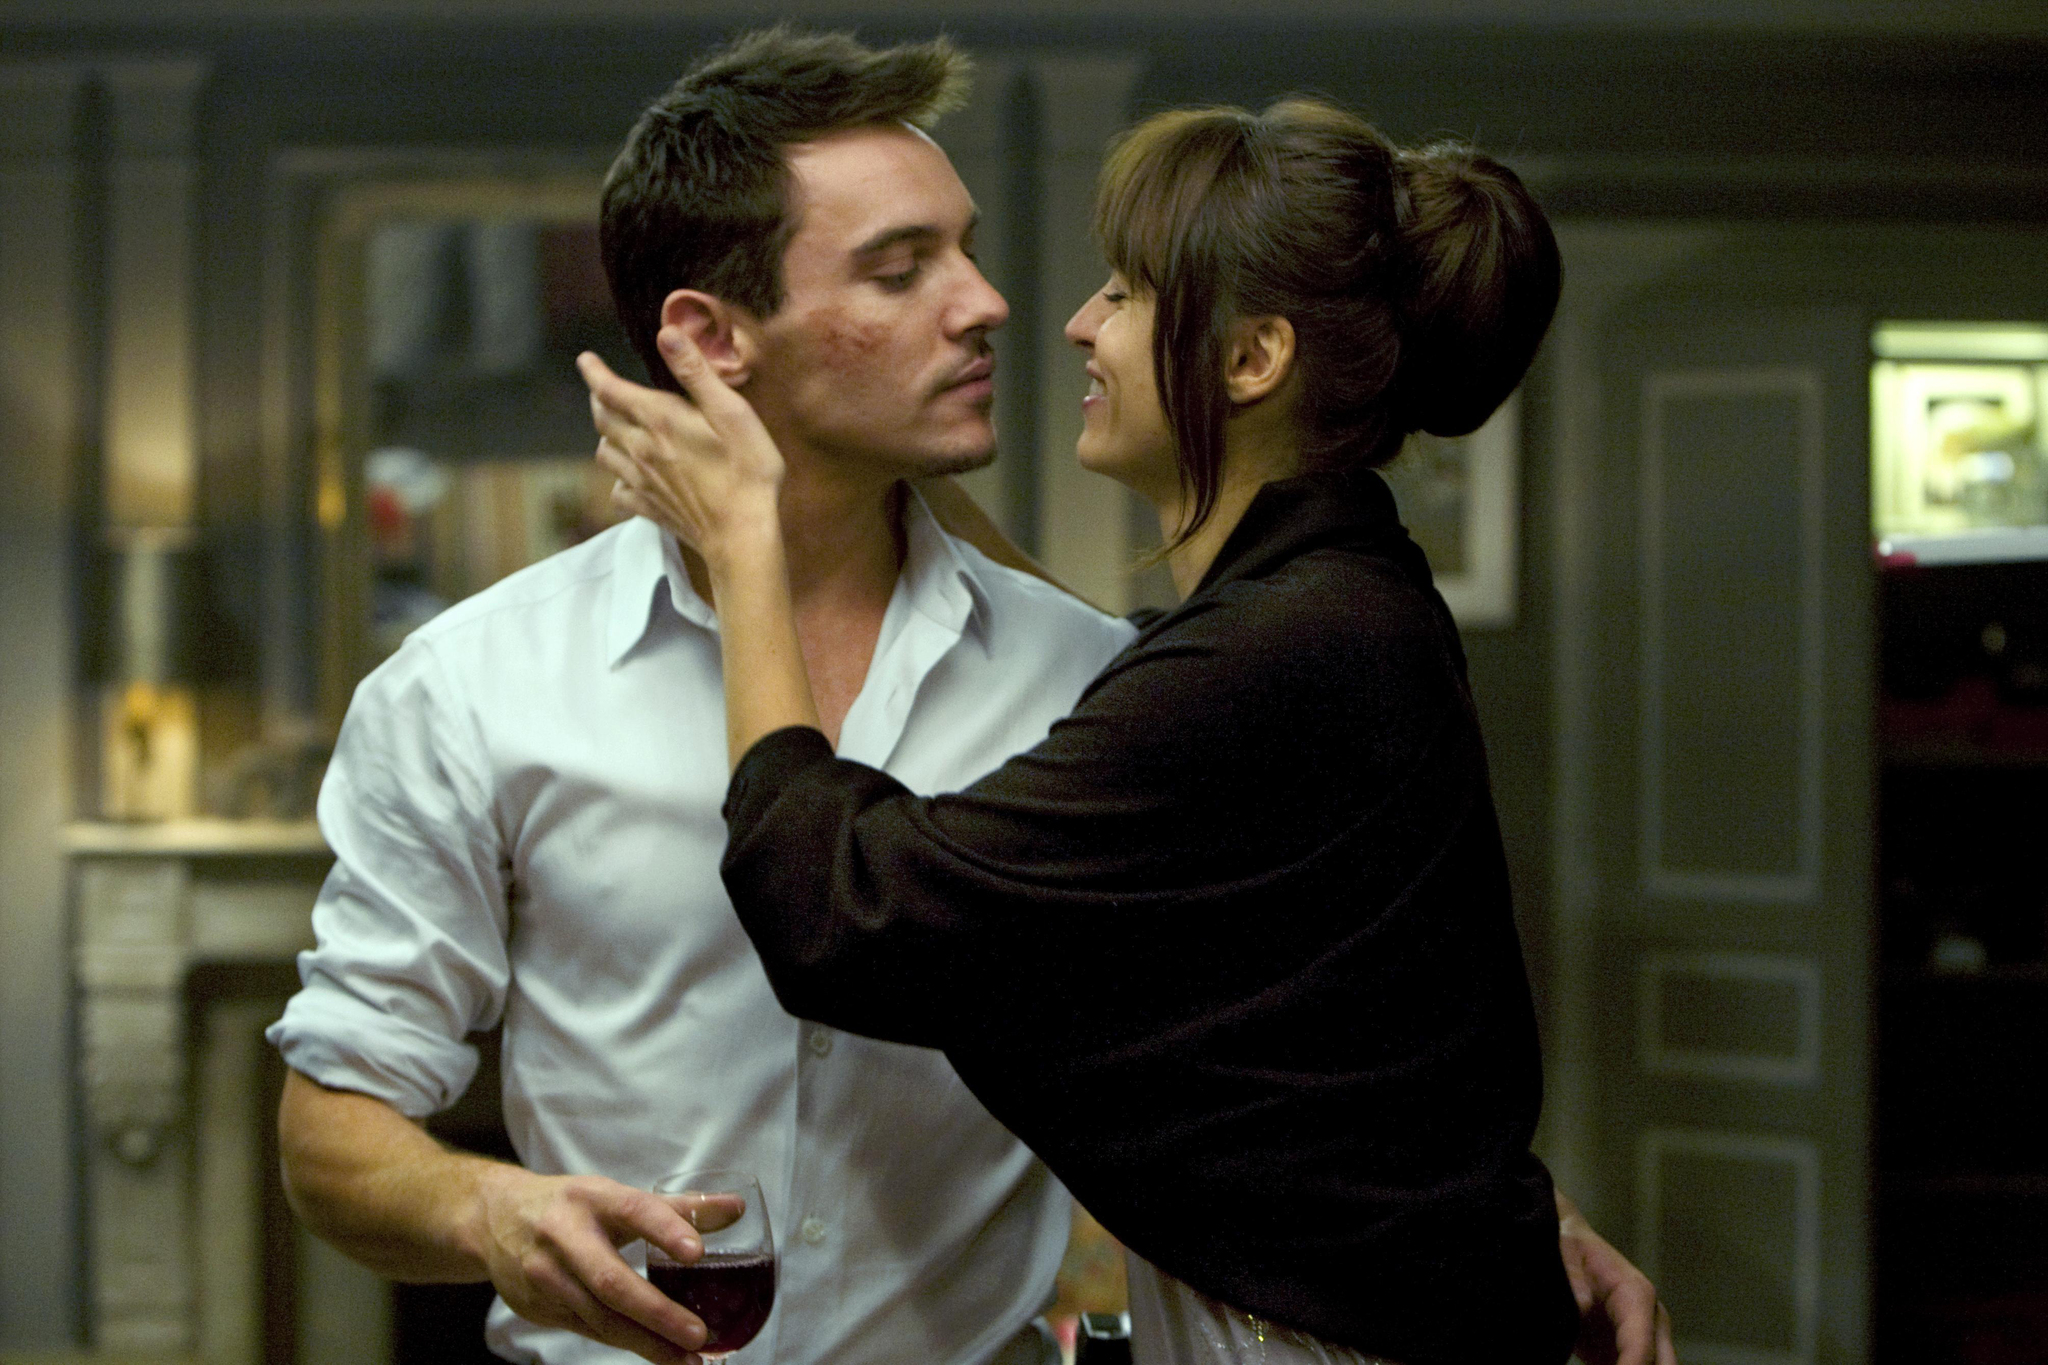 Still of Jonathan Rhys Meyers and Kasia Smutniak in From Paris with Love (2010)